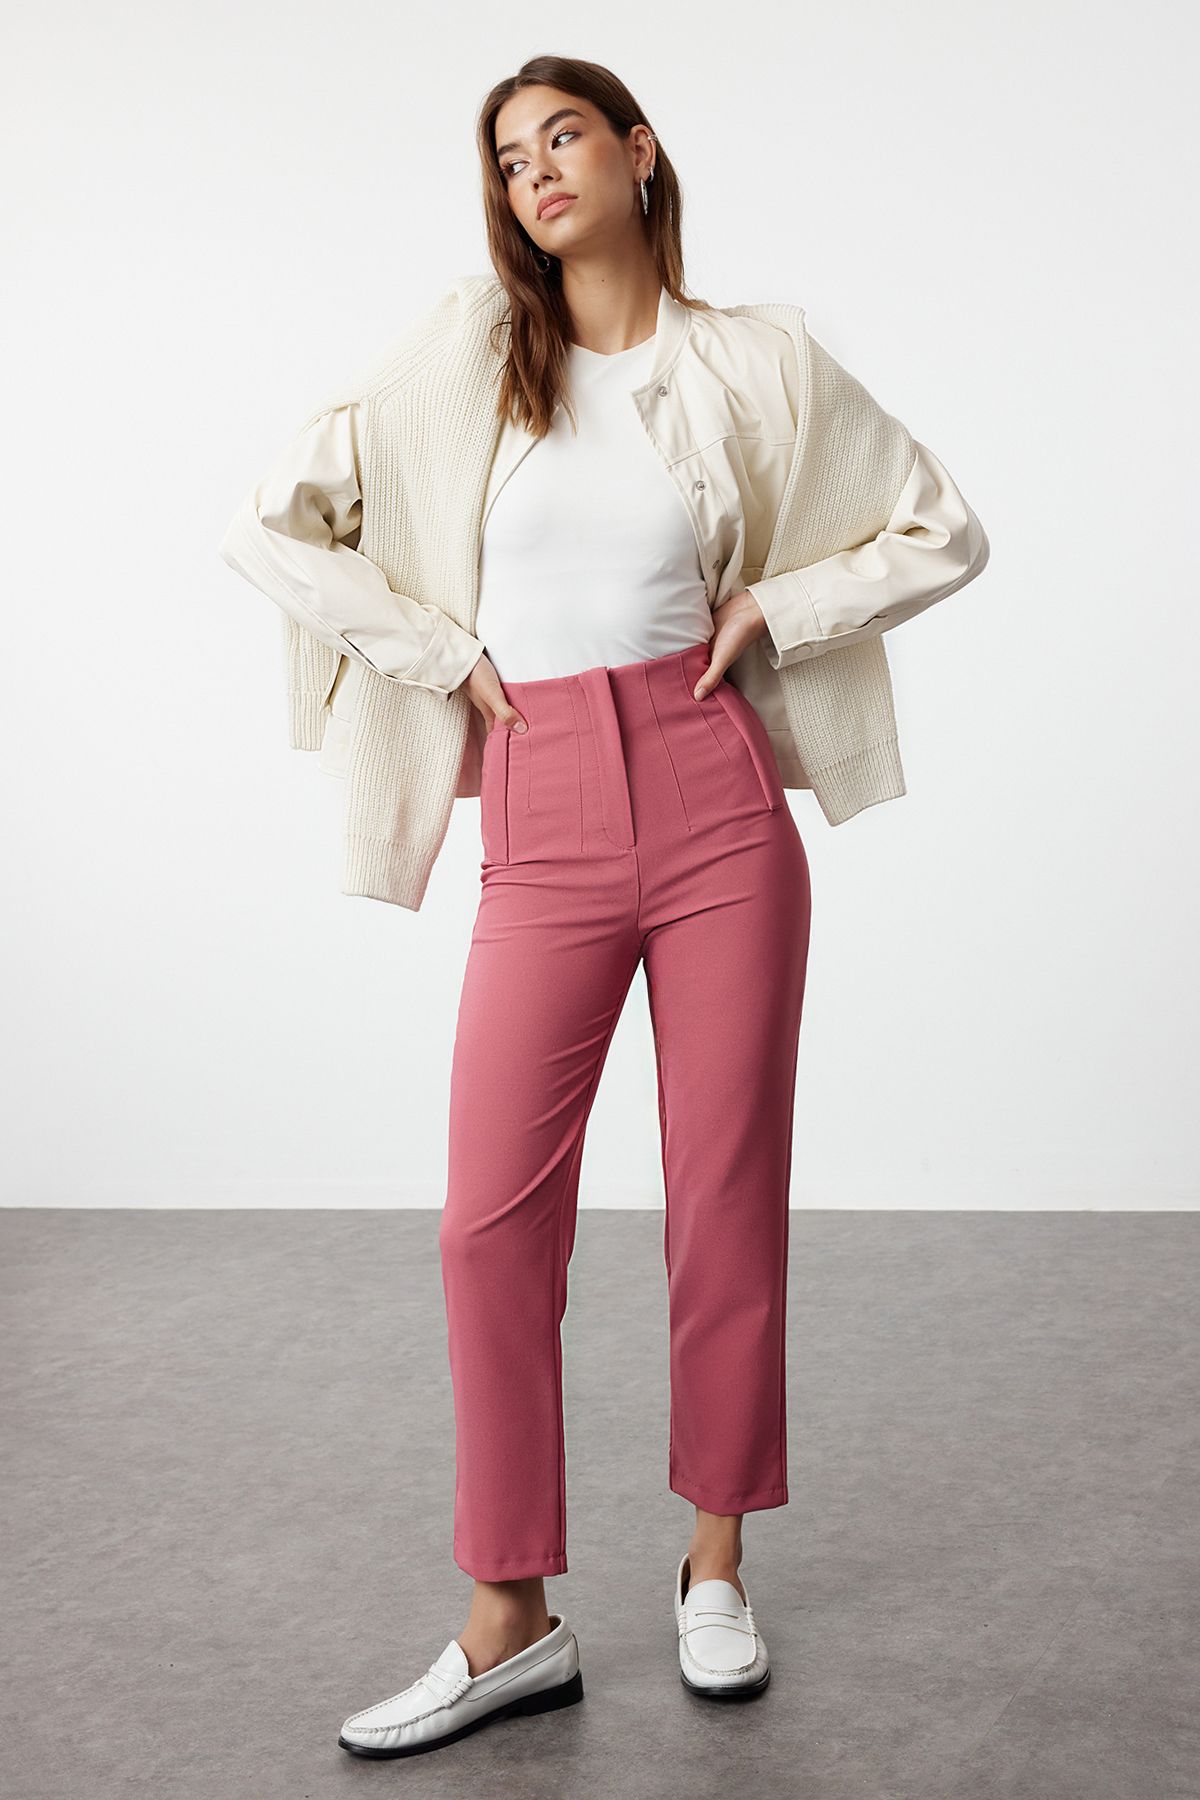 Trendyol Dusty Rose Cigarette Pattern Darted High Waist Ankle Length Woven Trousers